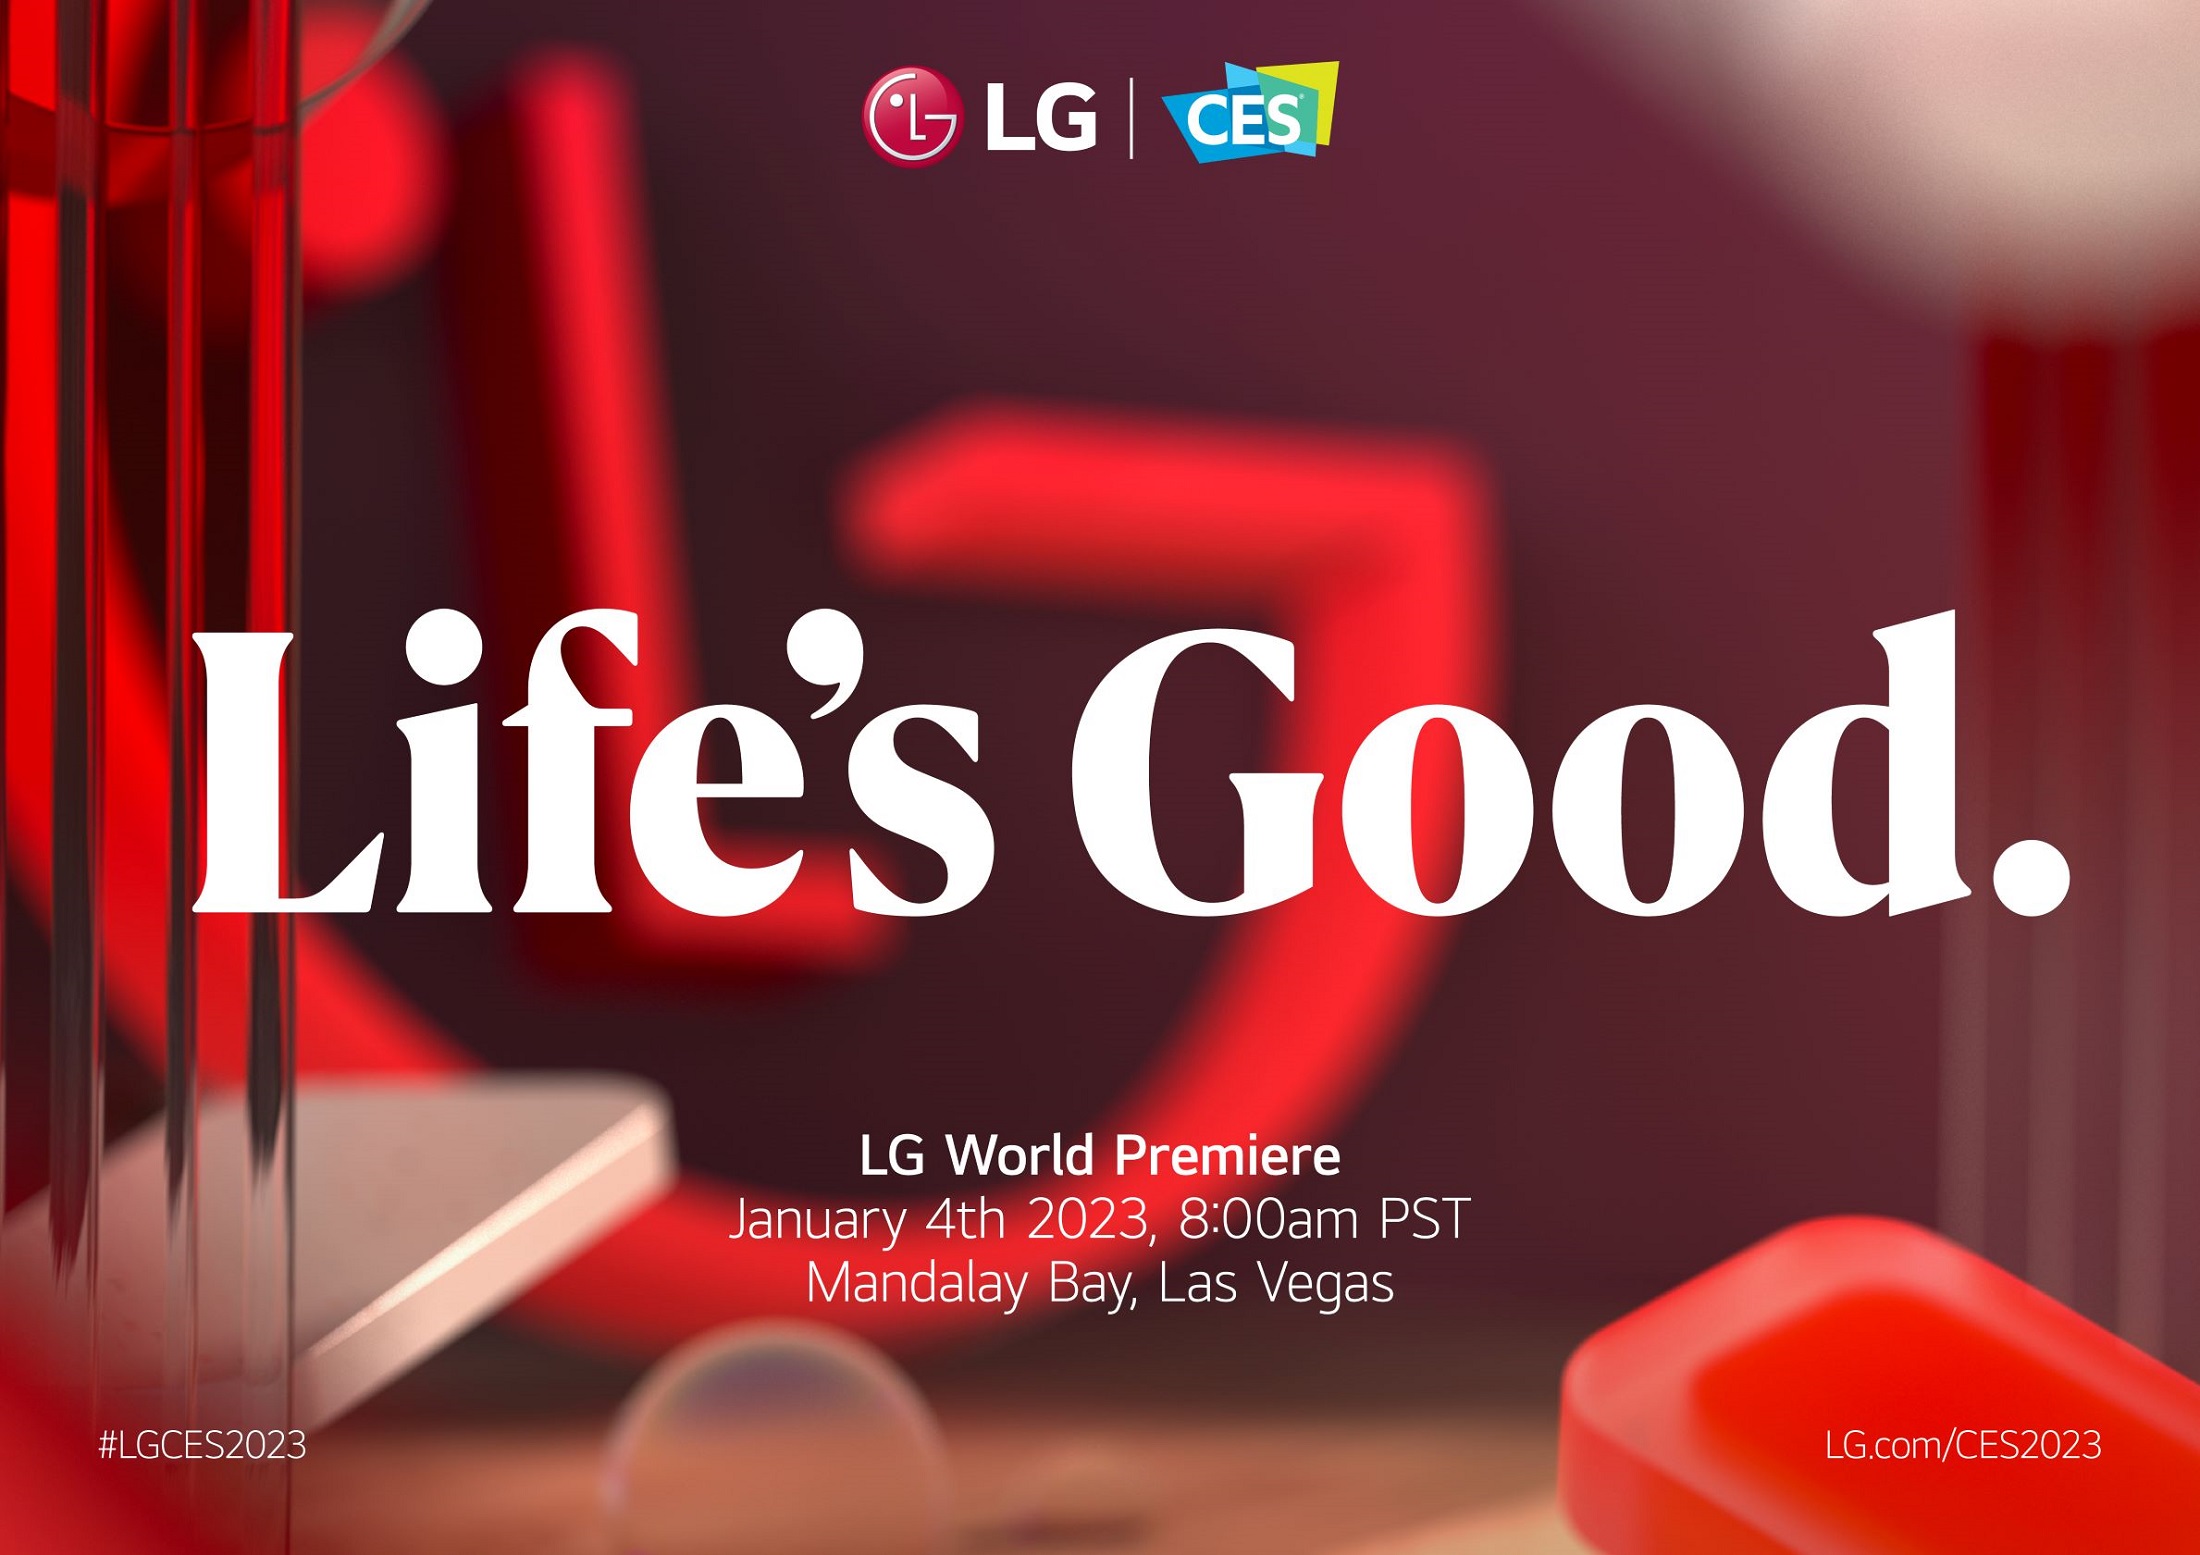 The promotional image of LG for CES 2023_Landscape